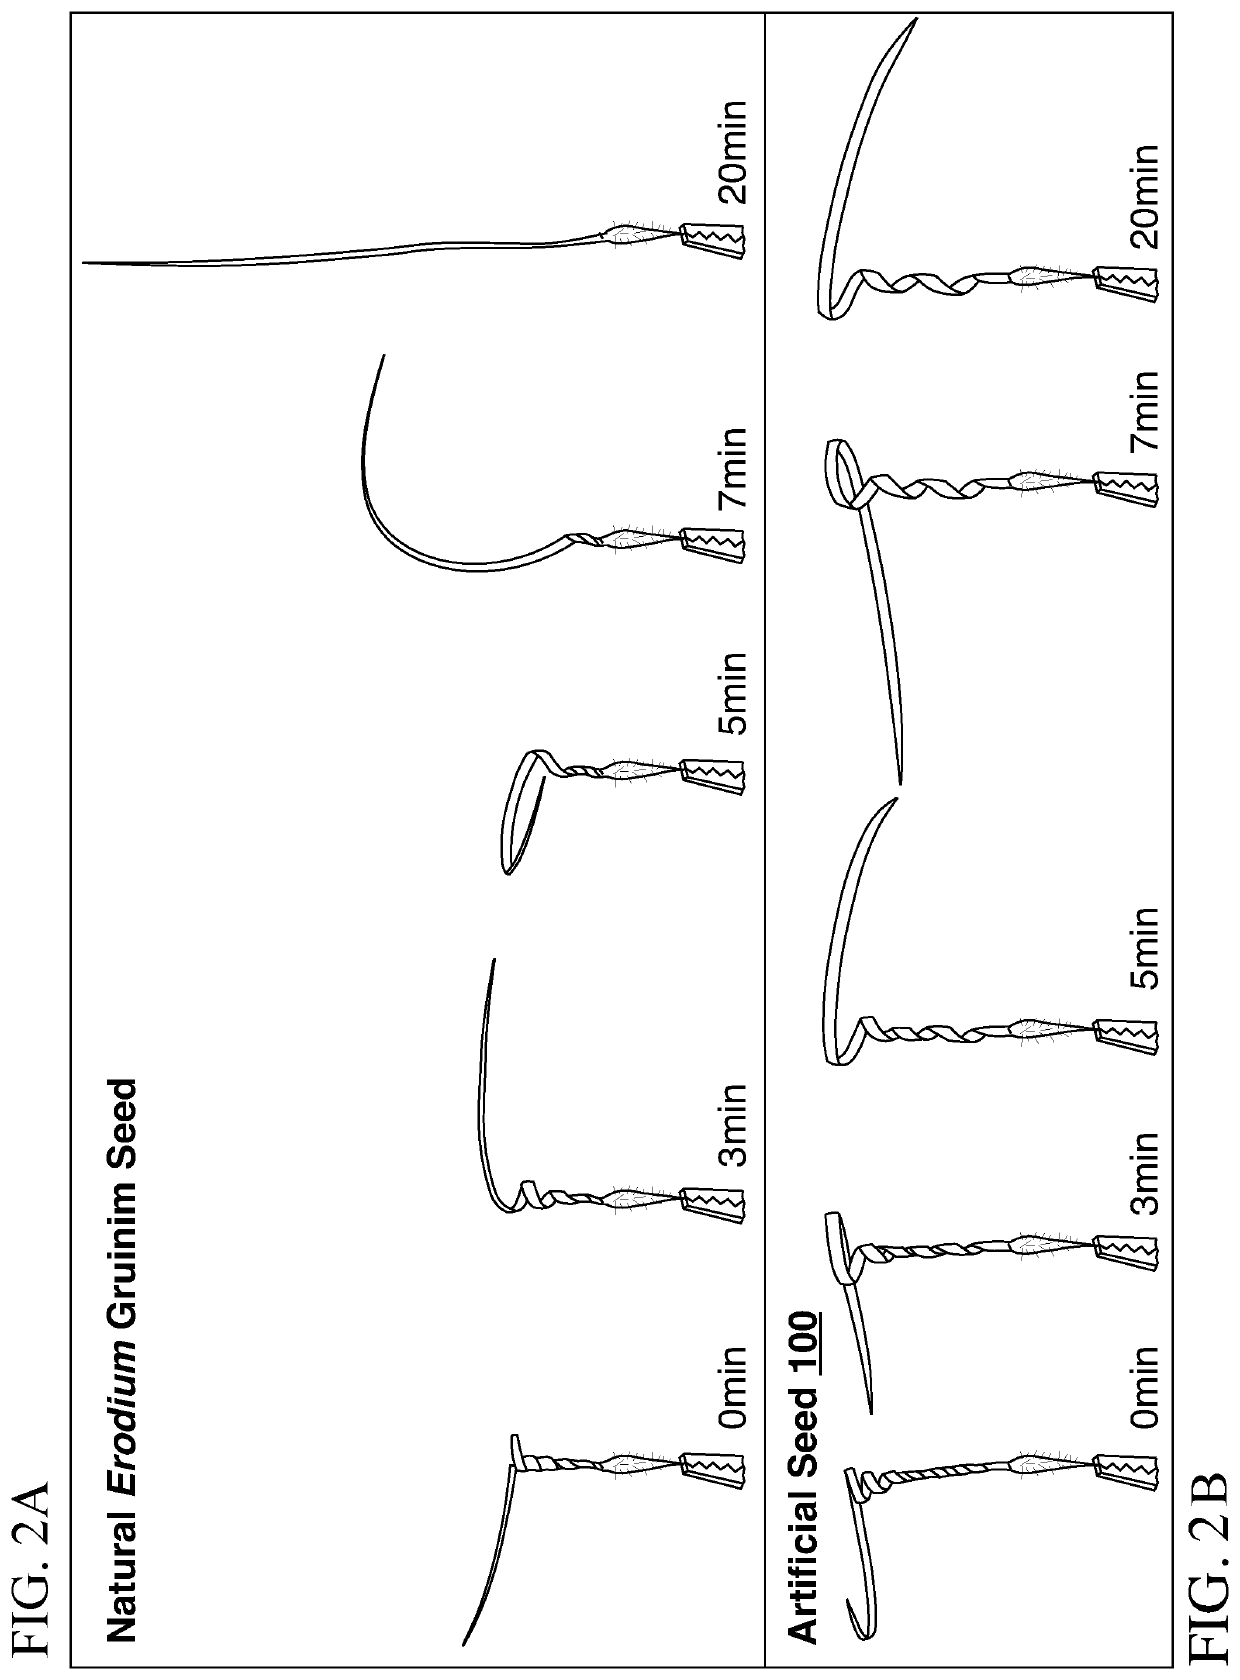 Methods and devices for biomimetic hygromorphic composite